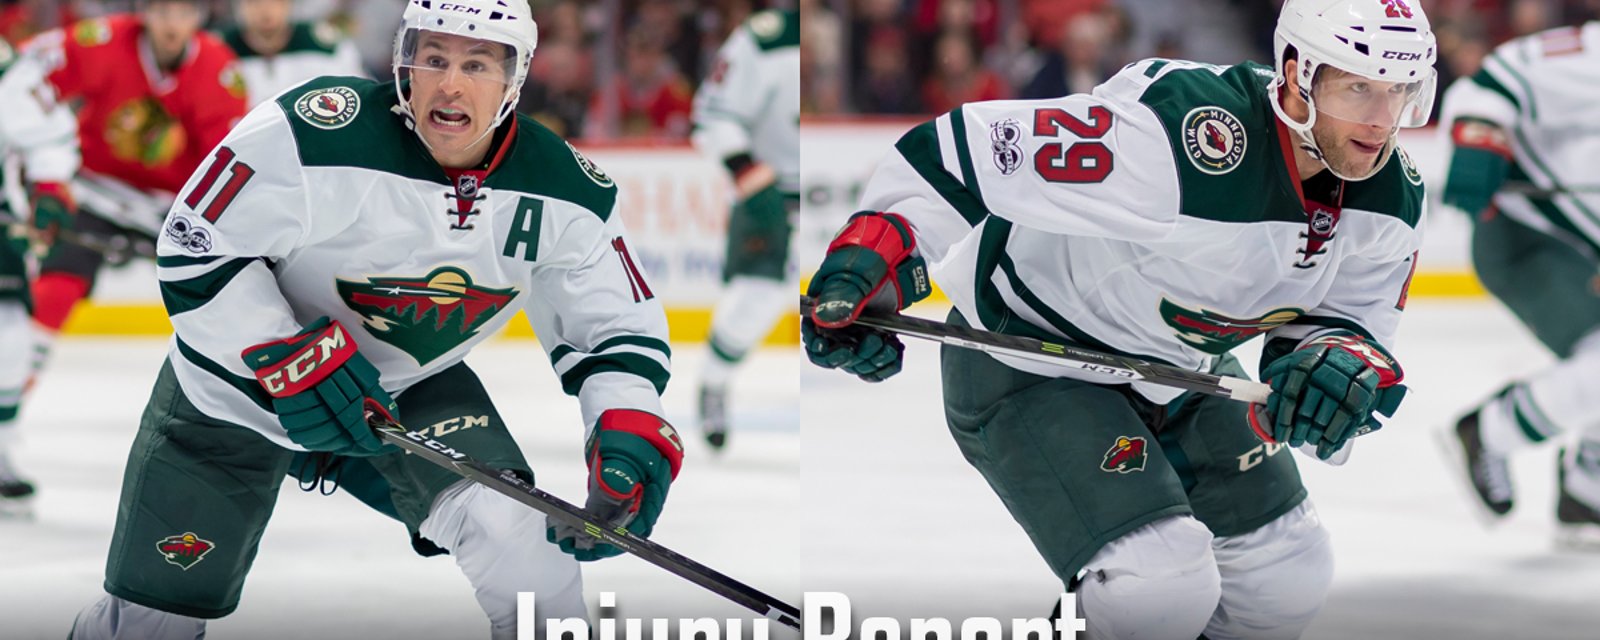 Injury Report: Important update on Parise and Pominville.